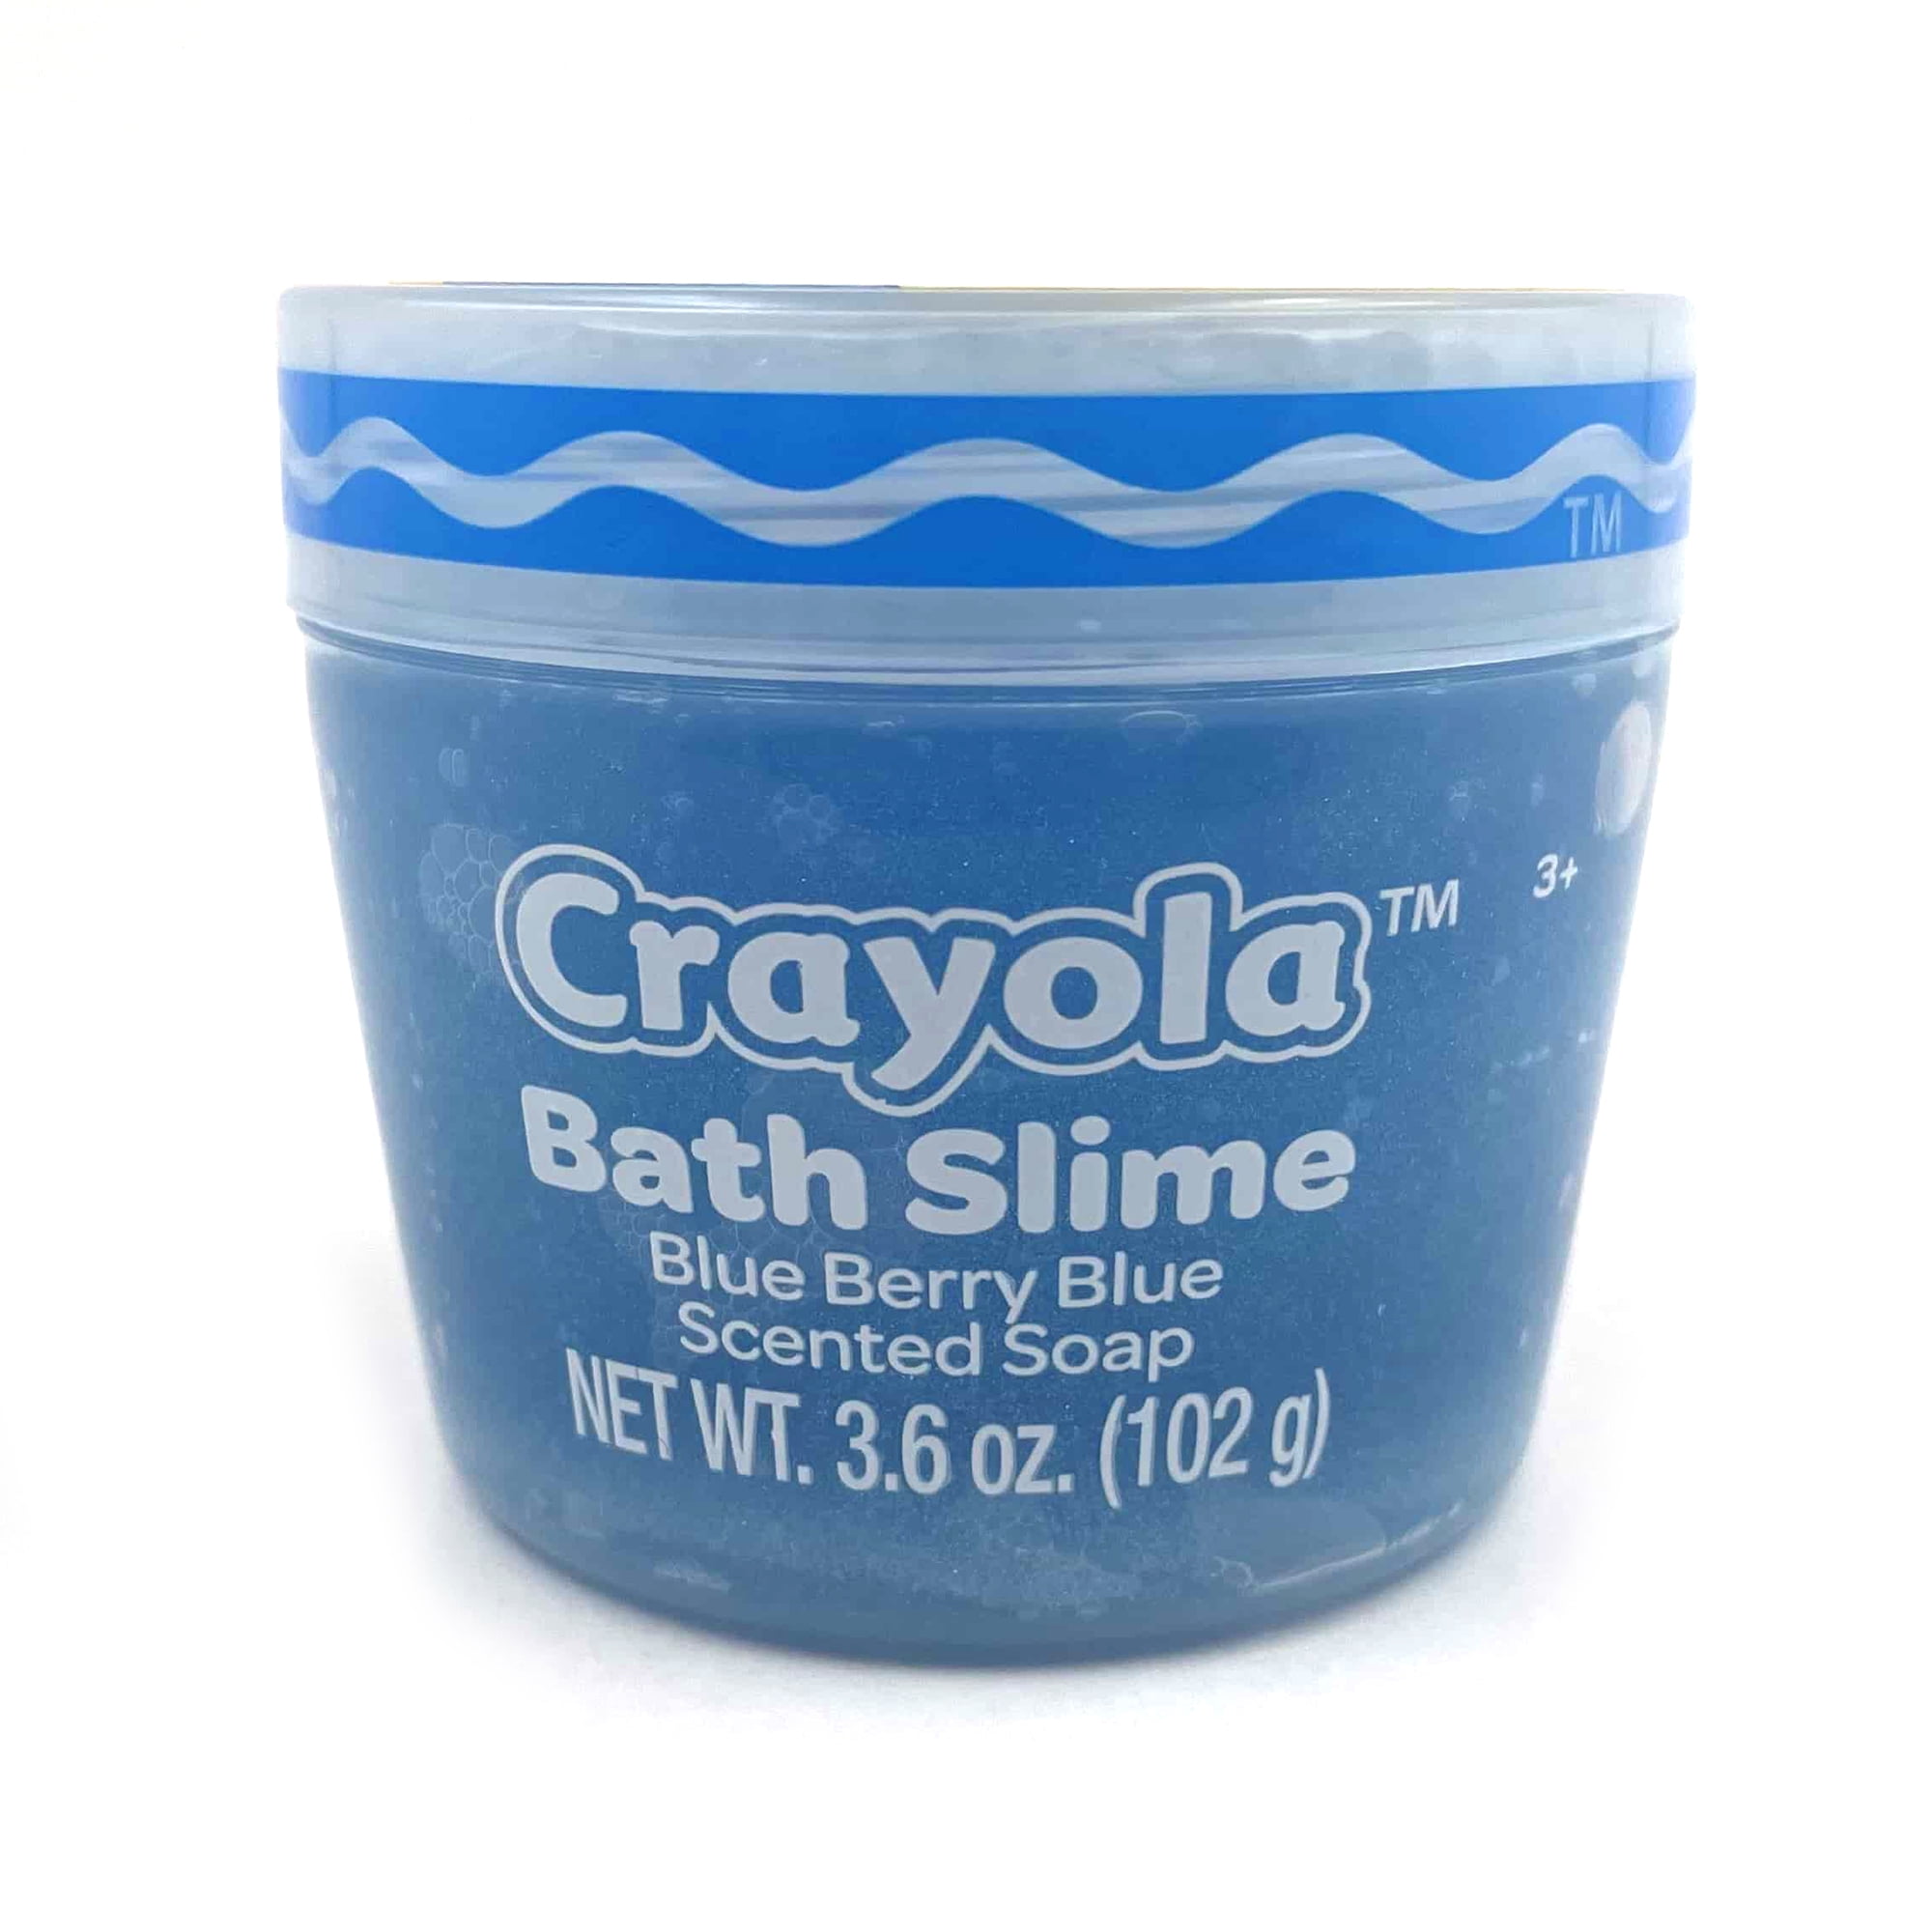 Crayola Bath Slime Soap, Assorted colors and scents